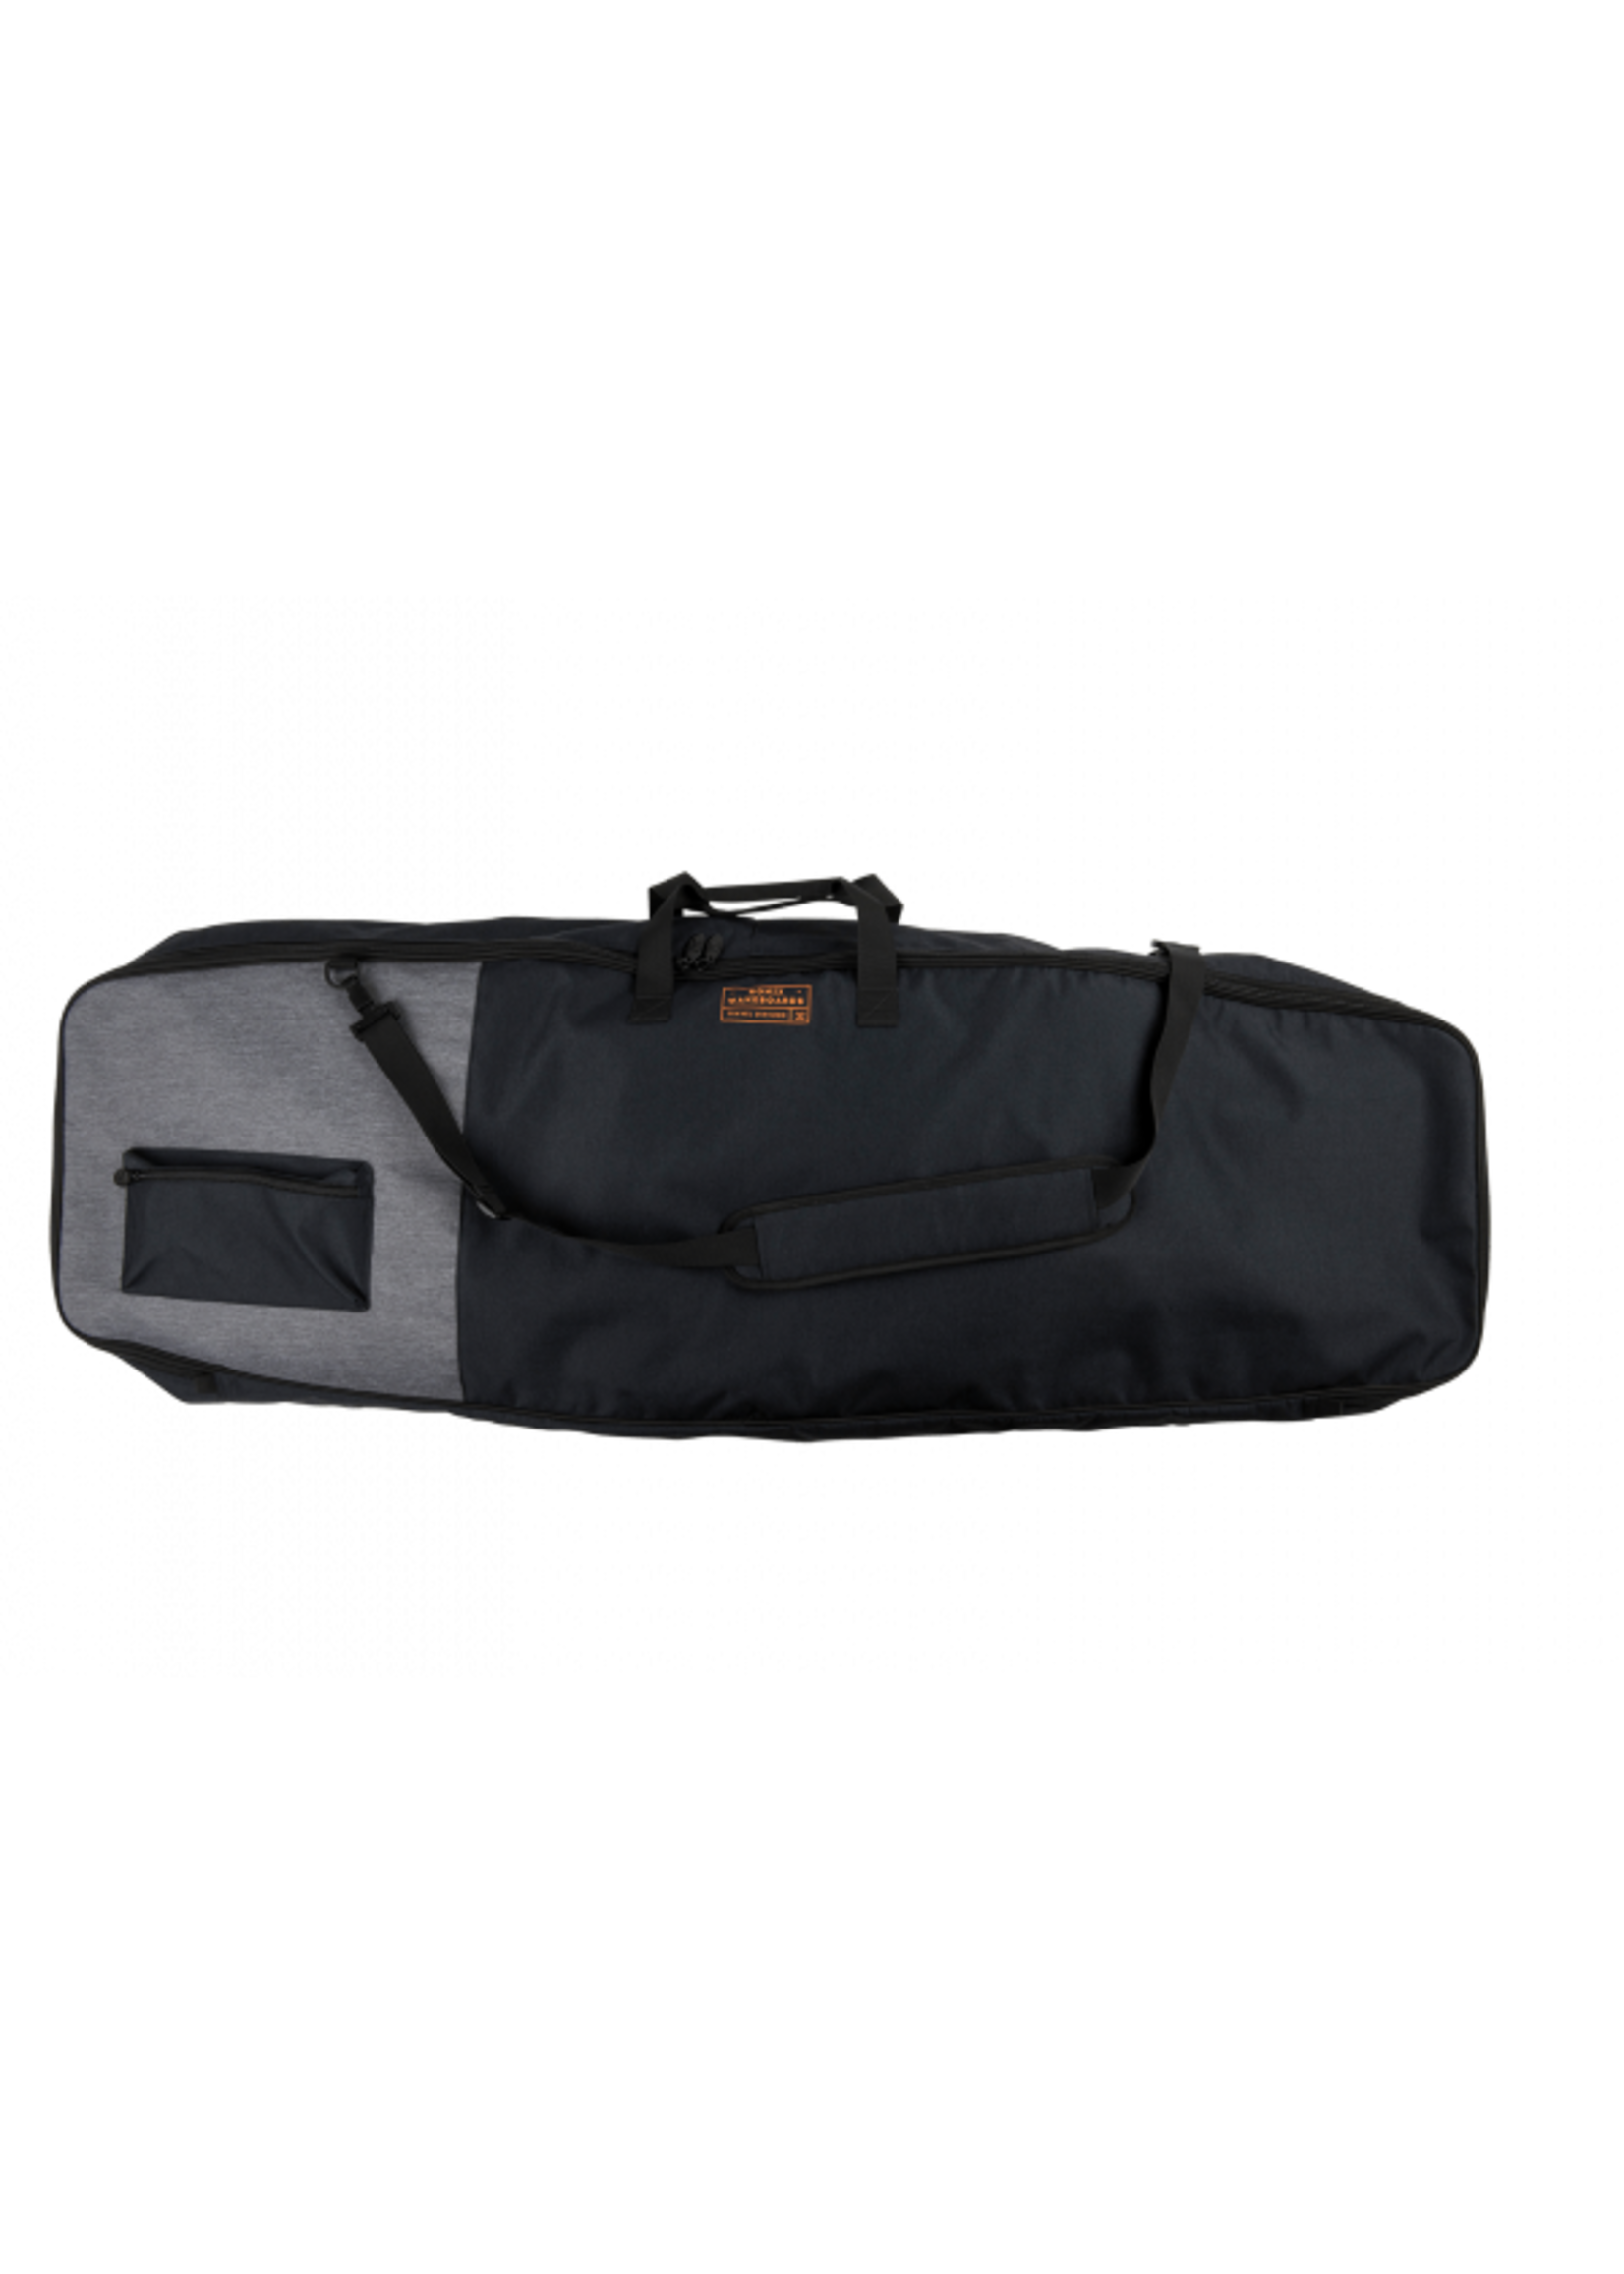 Ronix Collateral Wakeboard Bag